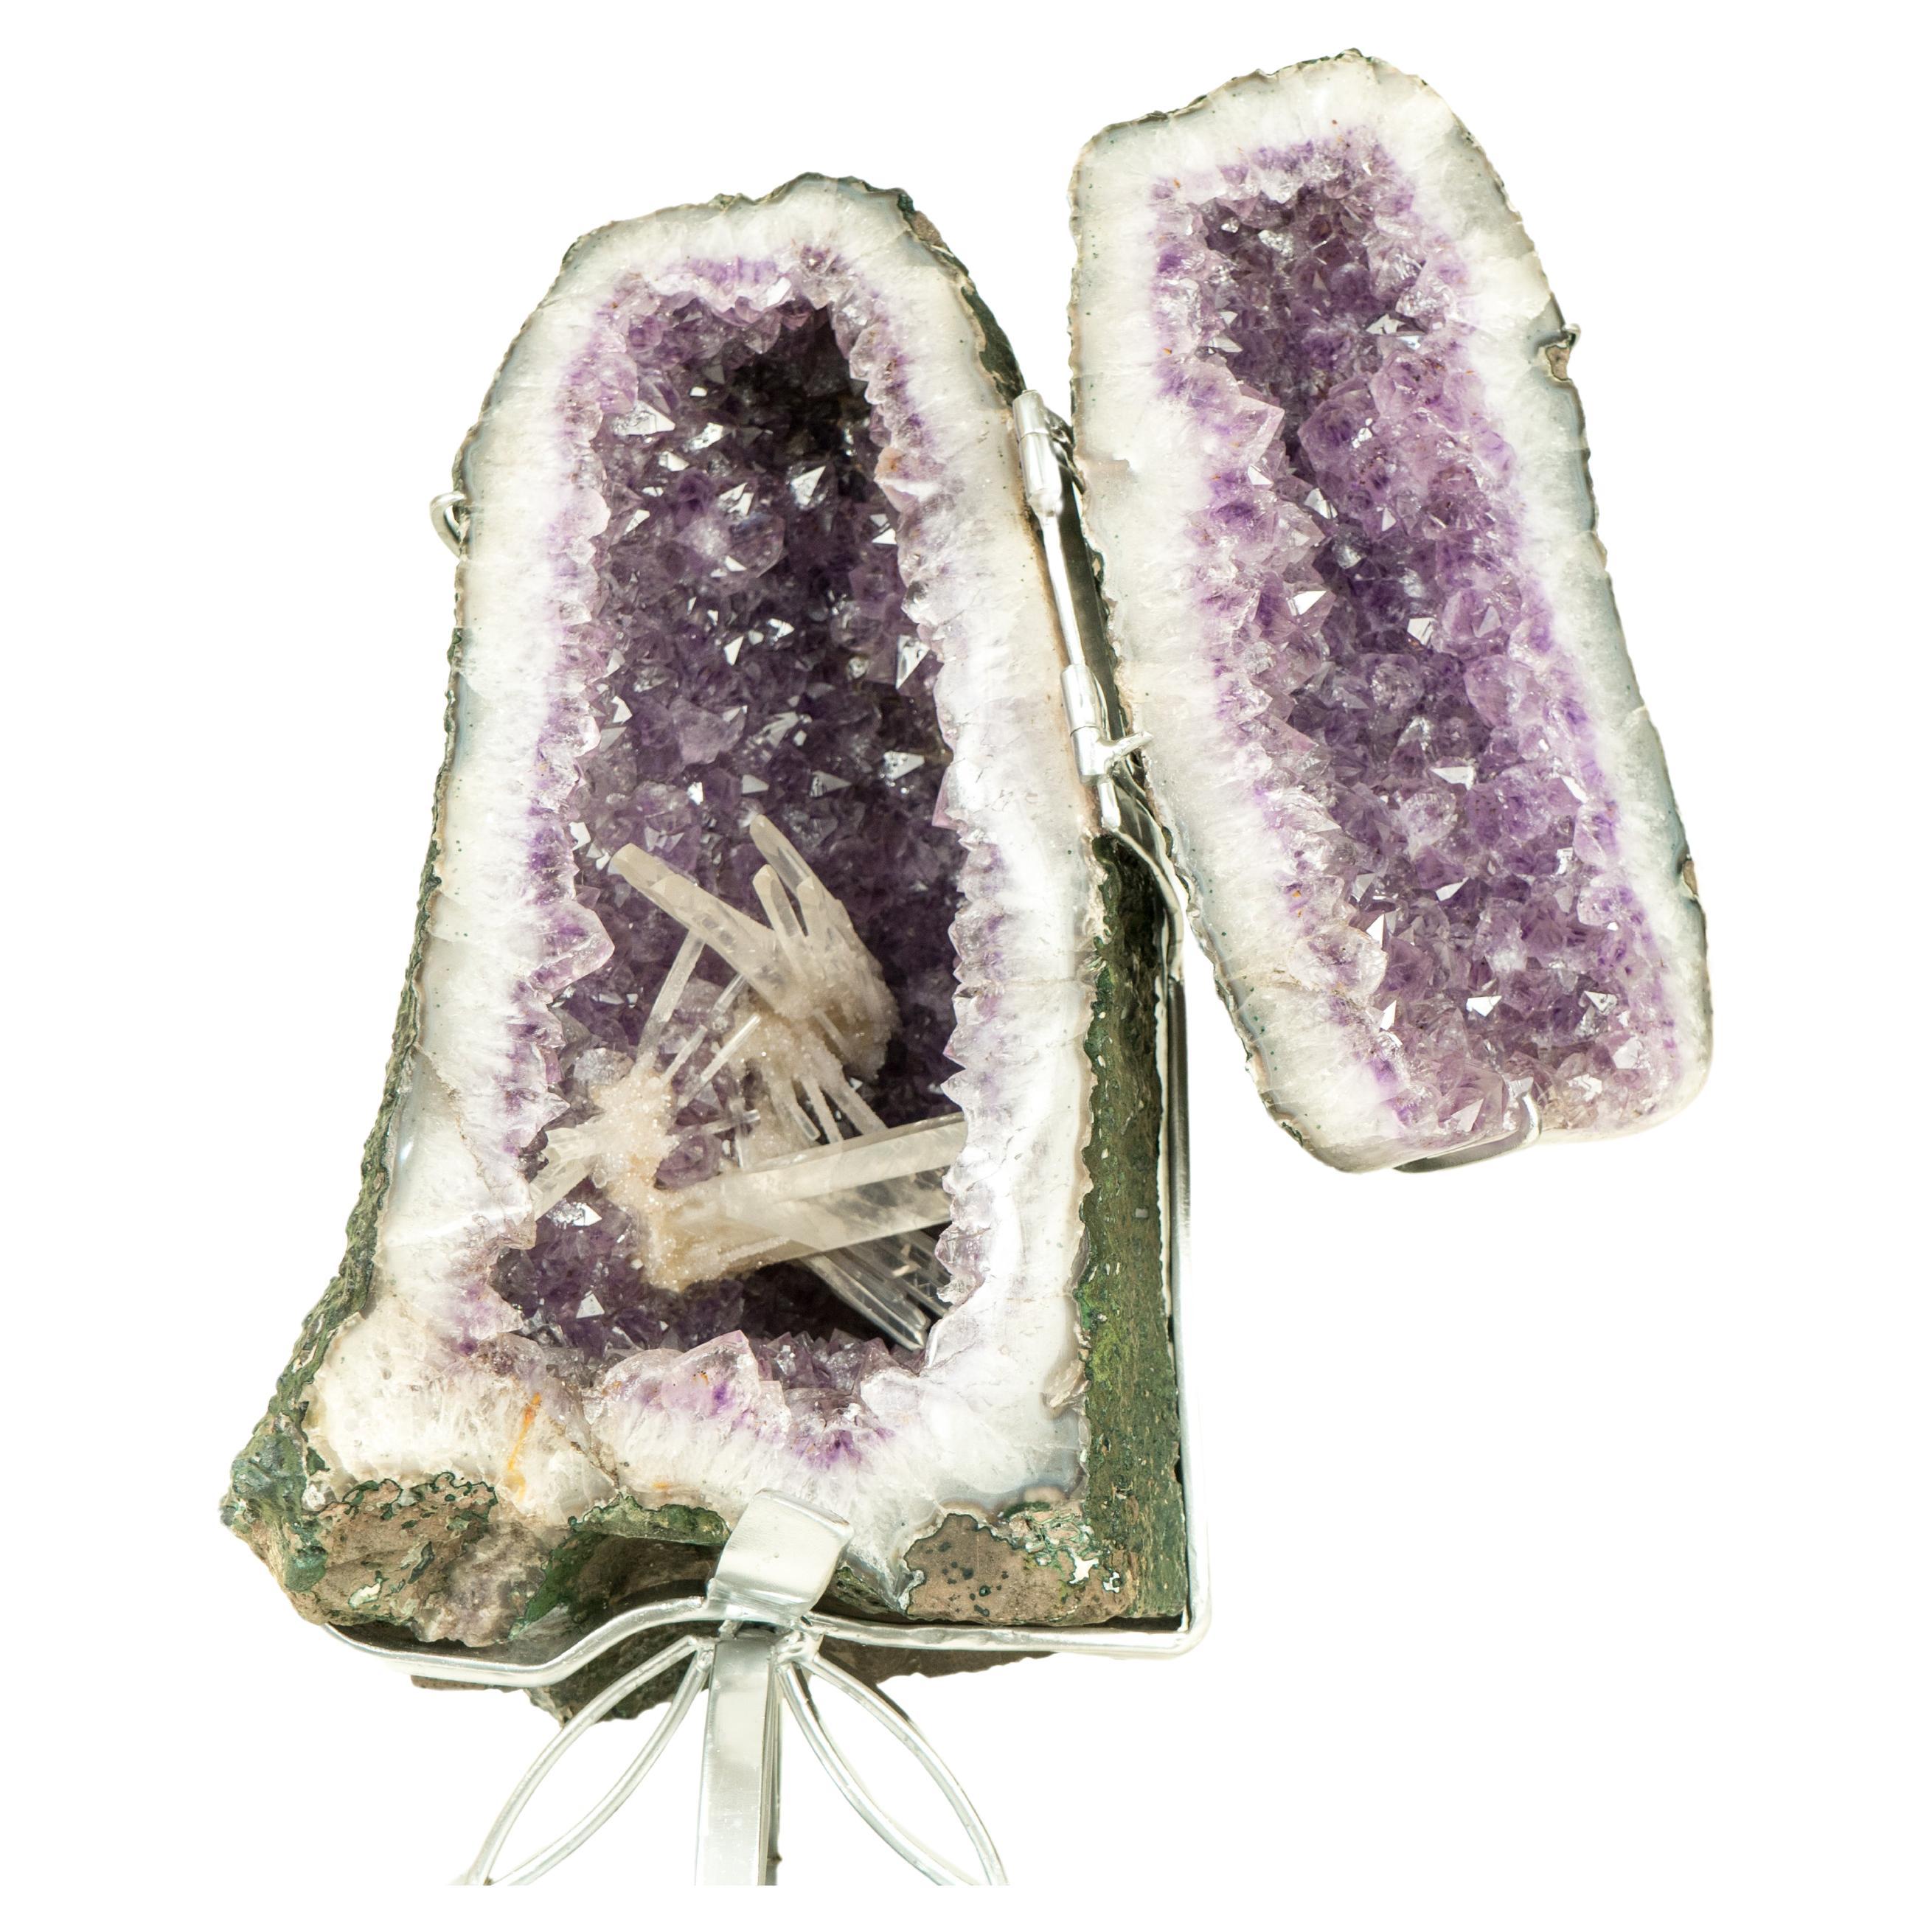 Rare, World-Class Calcite in Intact Amethyst Geode, A Natural Masterpiece For Sale